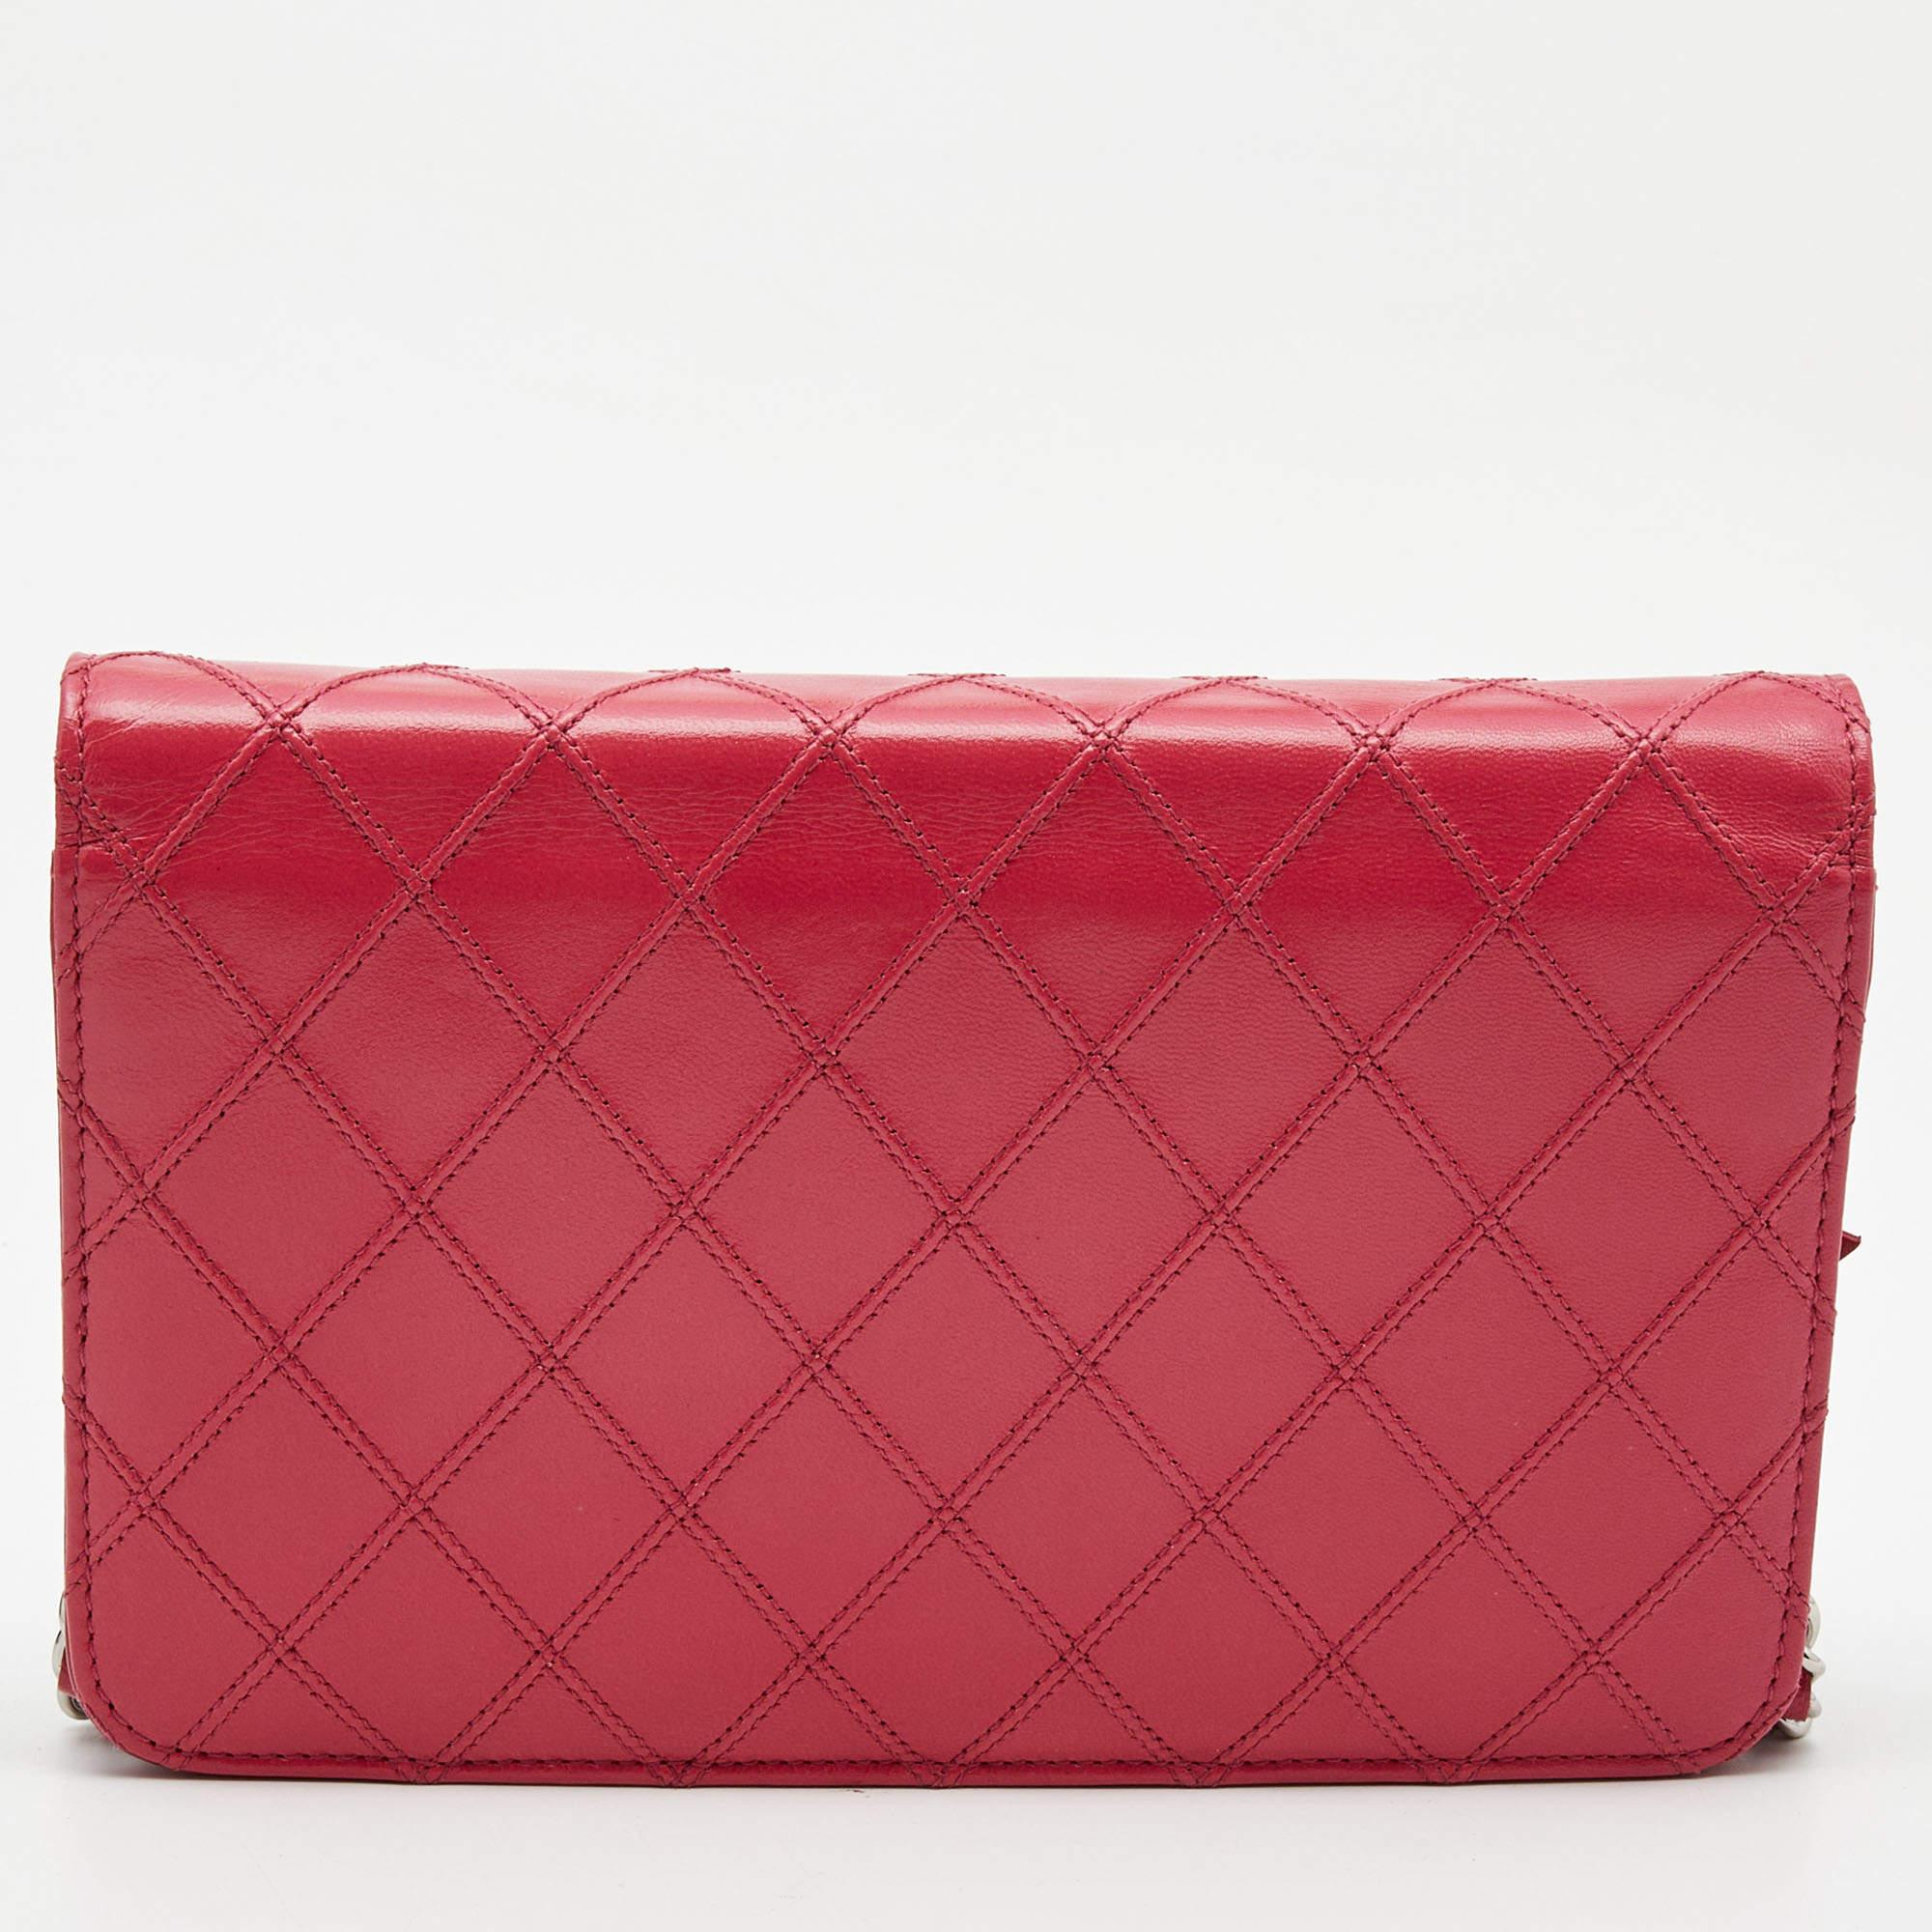 Women's Chanel Pink Quilted Leather WOC Bag For Sale